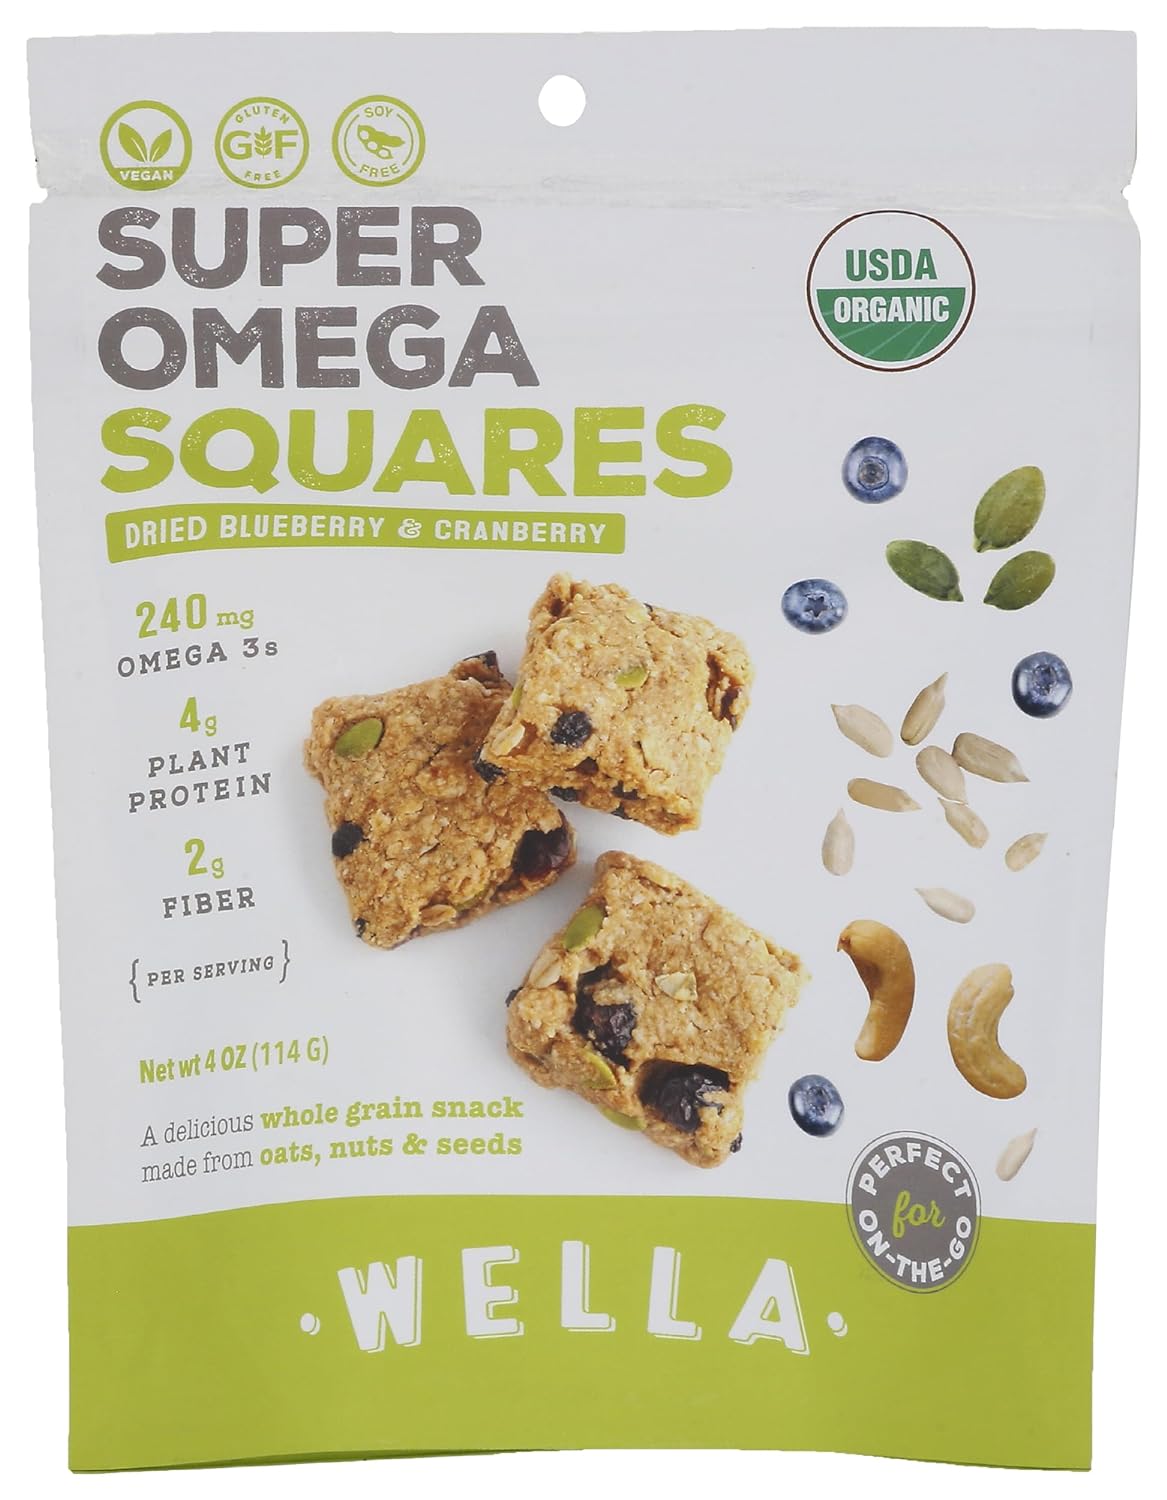 WELLA BAR Dried Blueberry and Cranberry Squares, 4 OZ